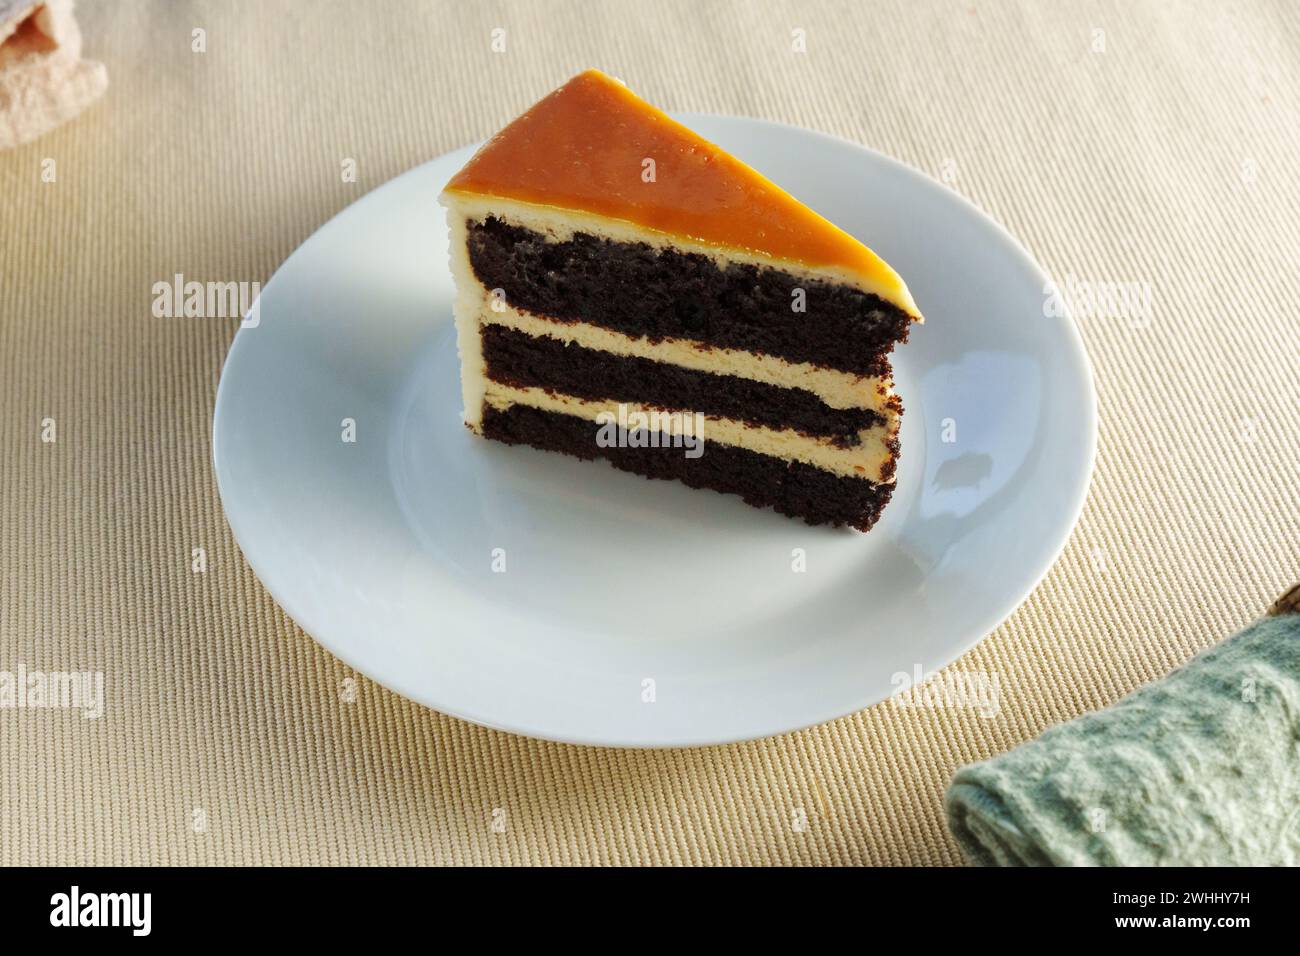 Sweet Delight: Delectable Cake Adorning a Crisp White Plate Stock Photo